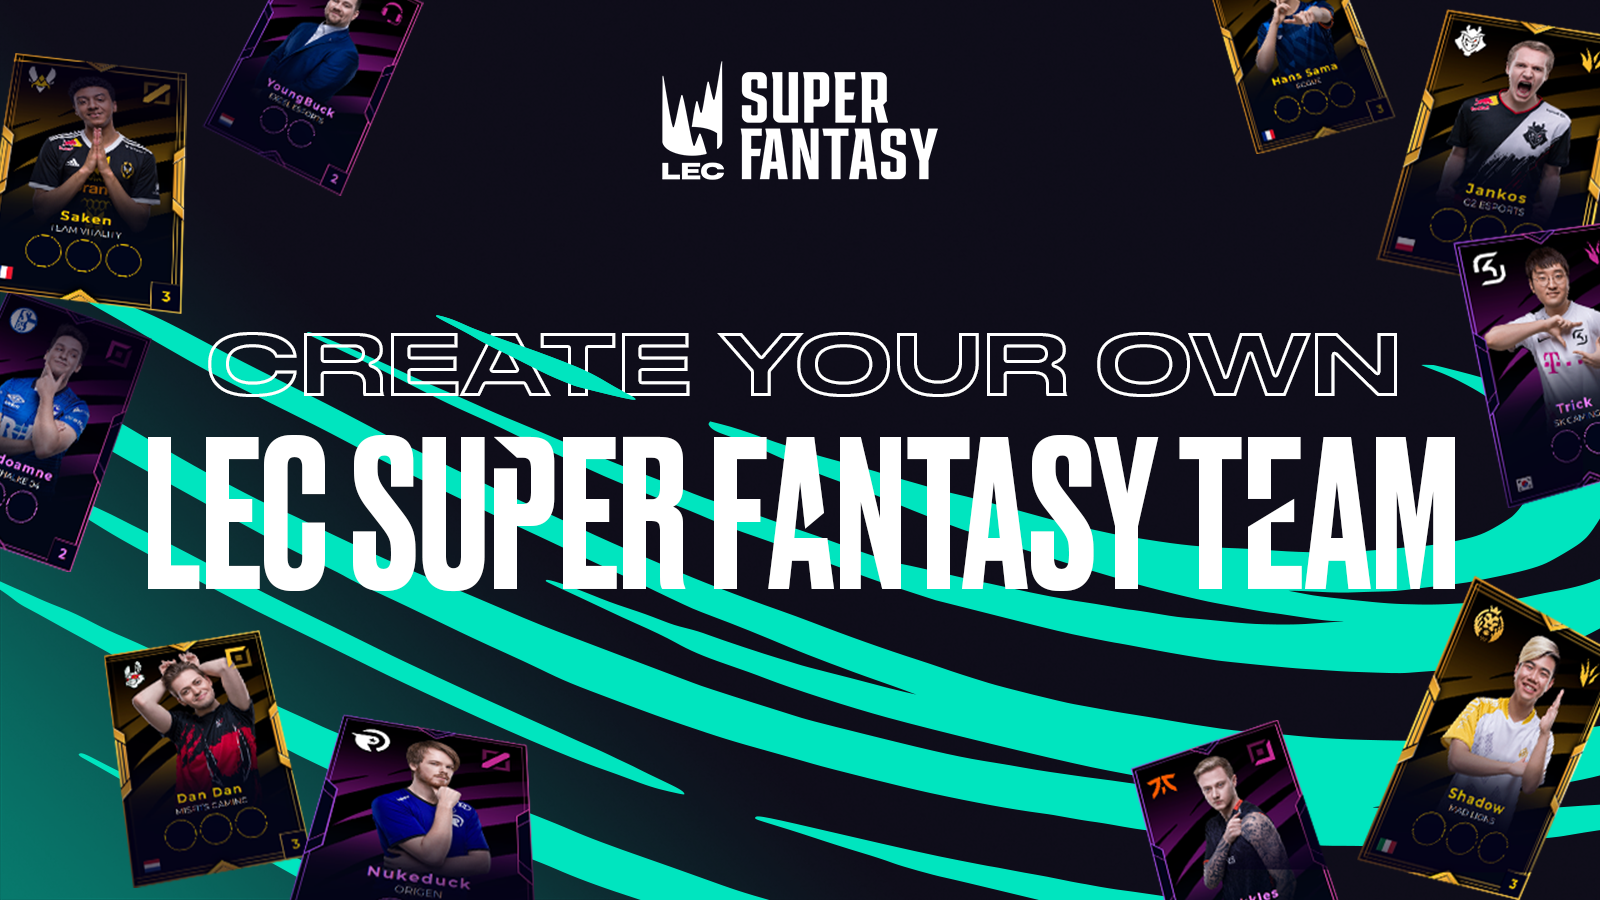 It S Time To Draft Your Dream League Team With Lec Superfantasy Esports Royalbeats In - pgs team wars roblox